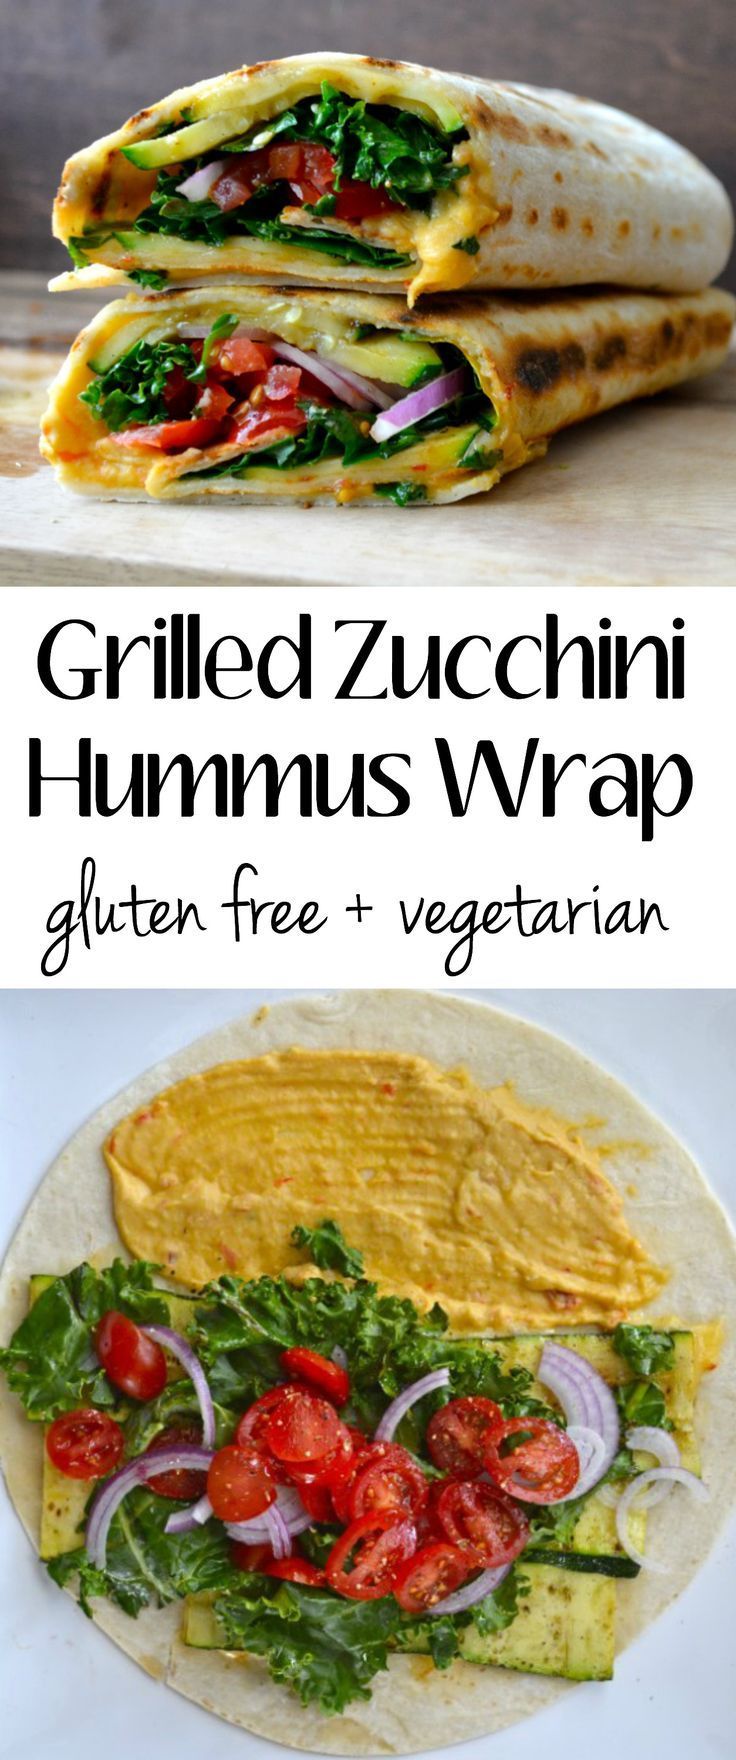 Fresh veggies are grilled to perfection and packed in this Grilled Zucchini Hummus Wrap!